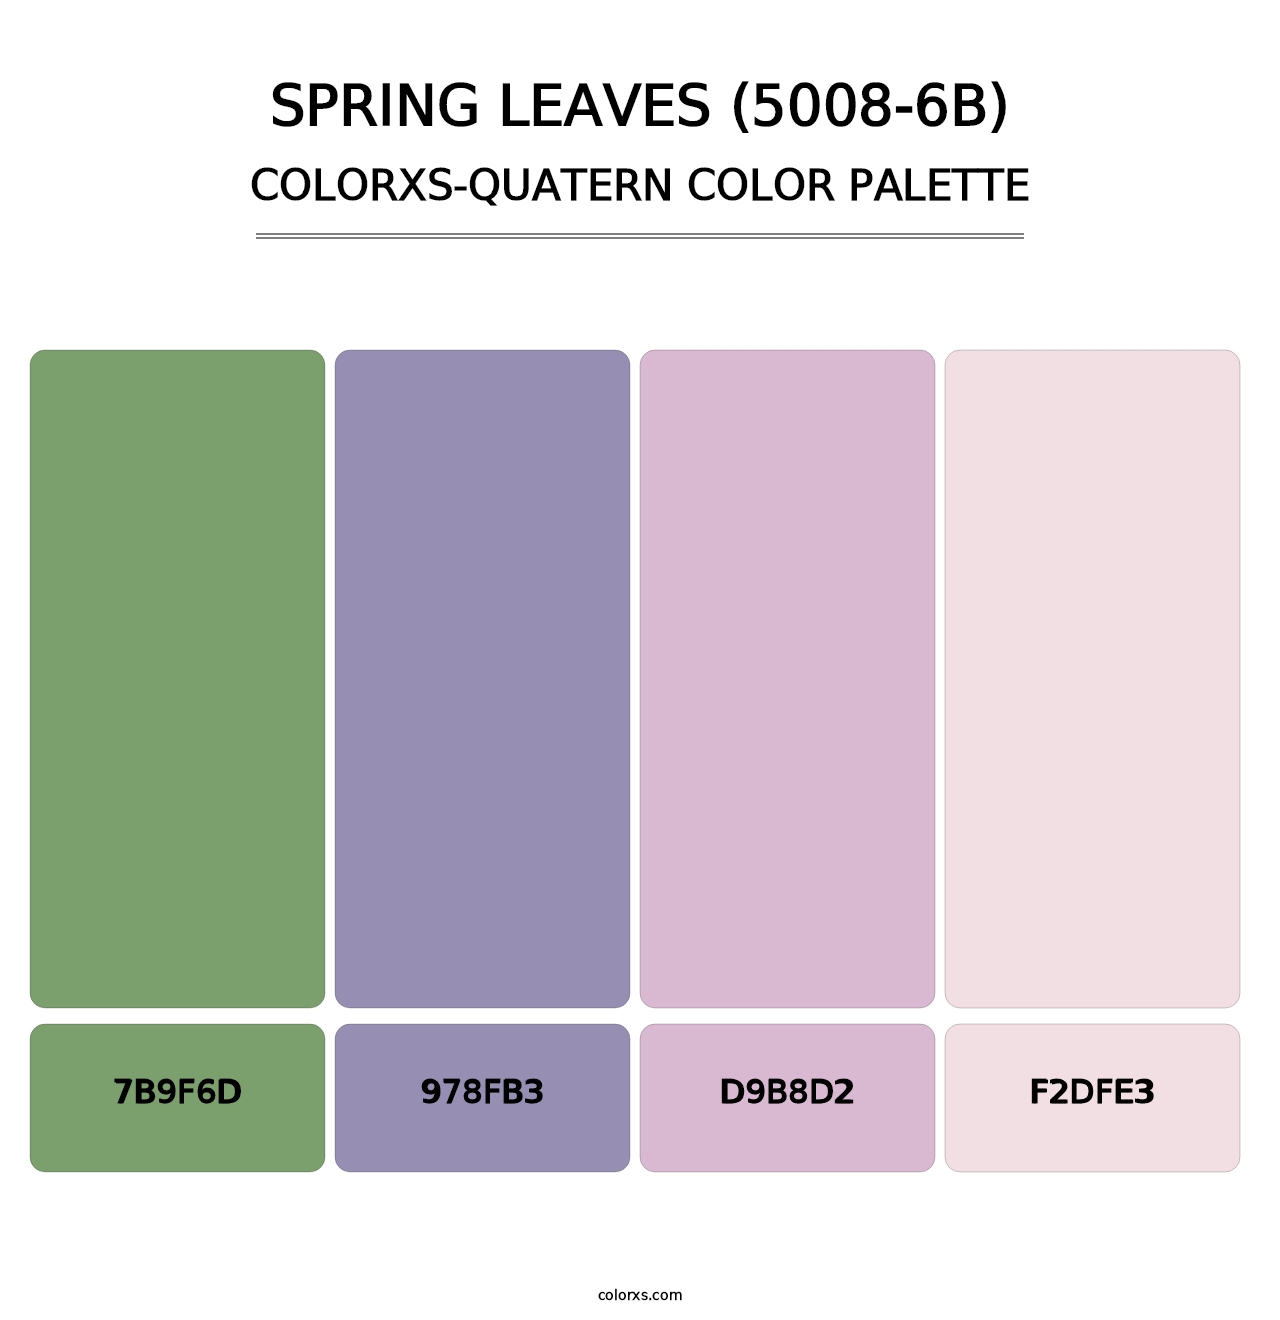 Spring Leaves (5008-6B) - Colorxs Quatern Palette